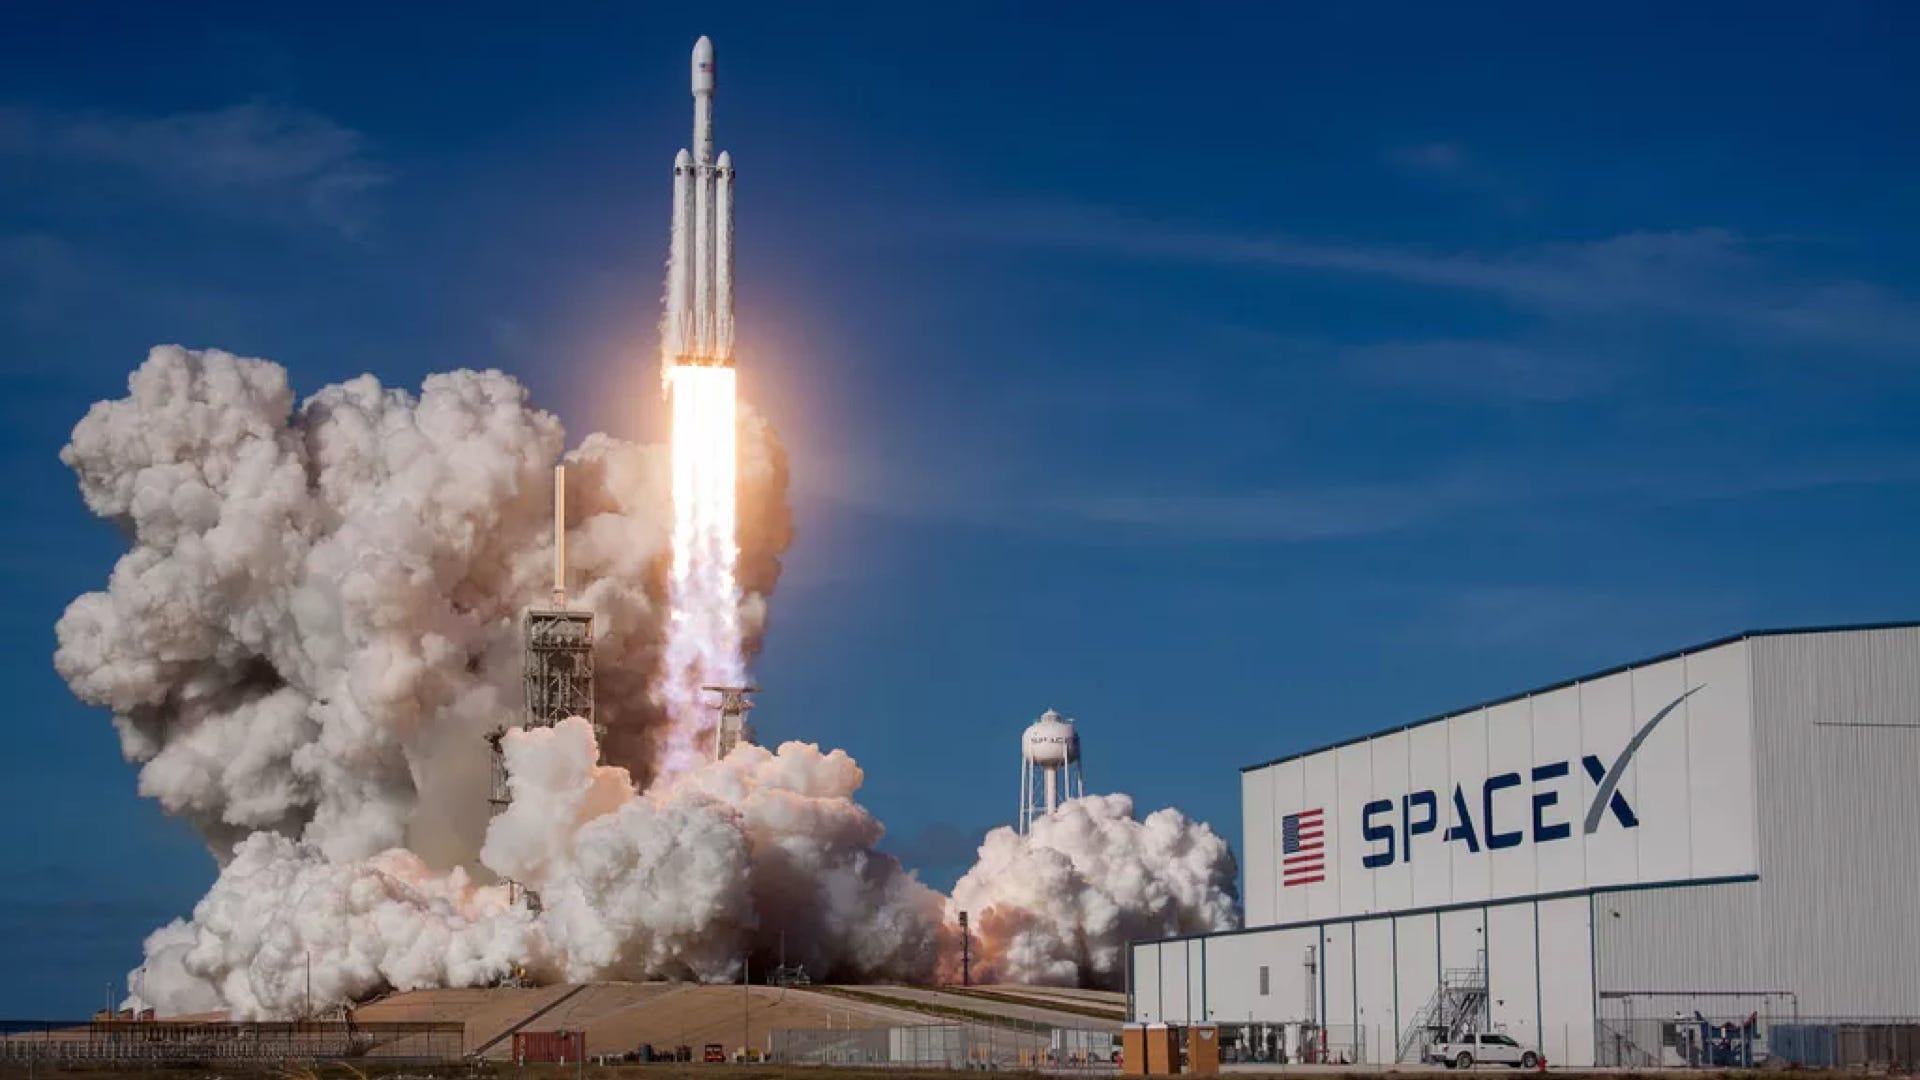 Mattel Teams Up With Elon Musk’s SpaceX to Create New Toys